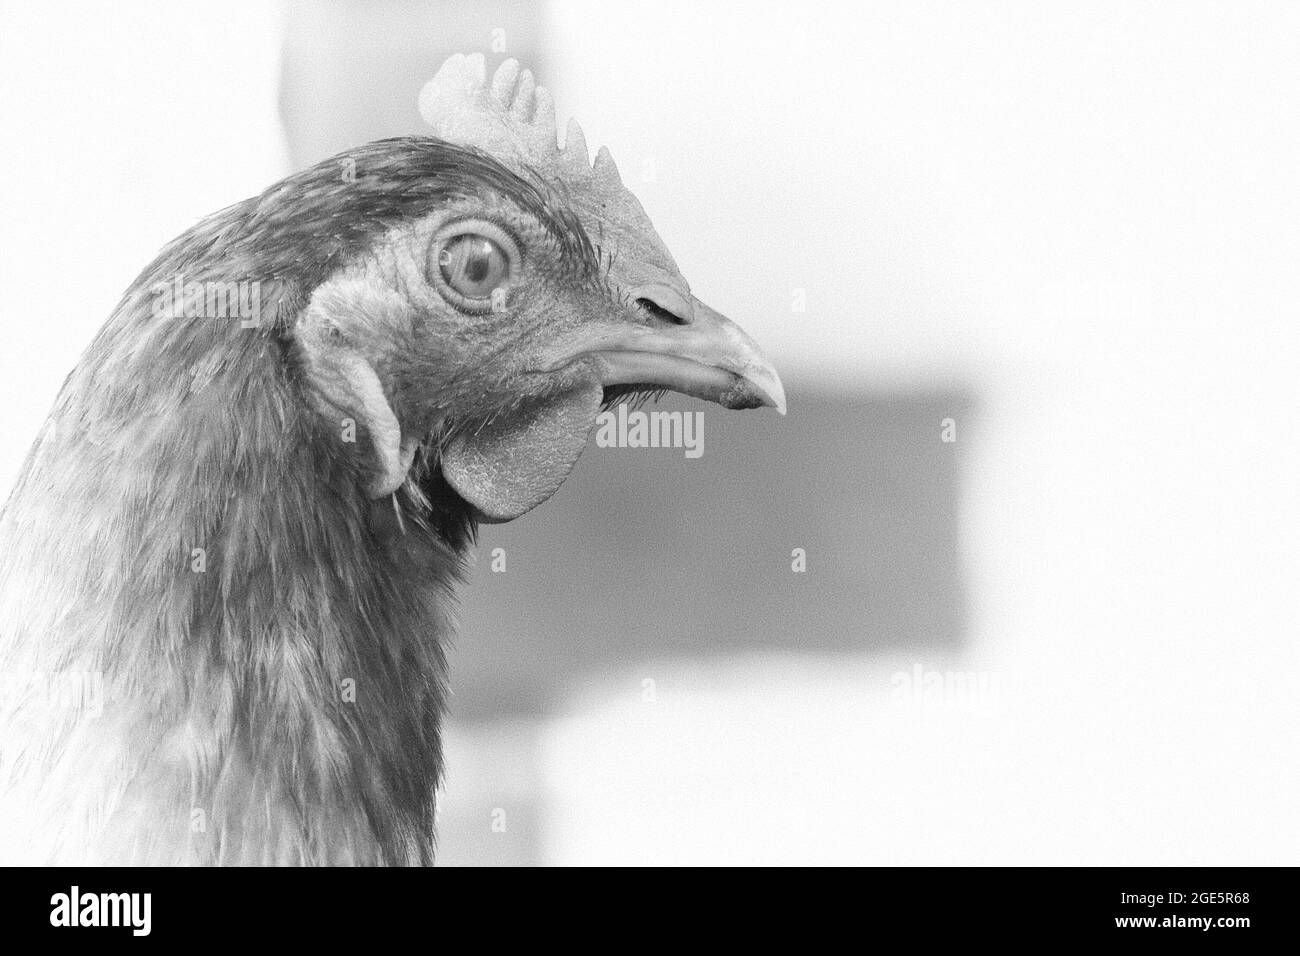 Chicken portrait side view, close-up. Portrait of a beautiful chicken with a comb on a blurred background. Copy space for text. Stock Photo